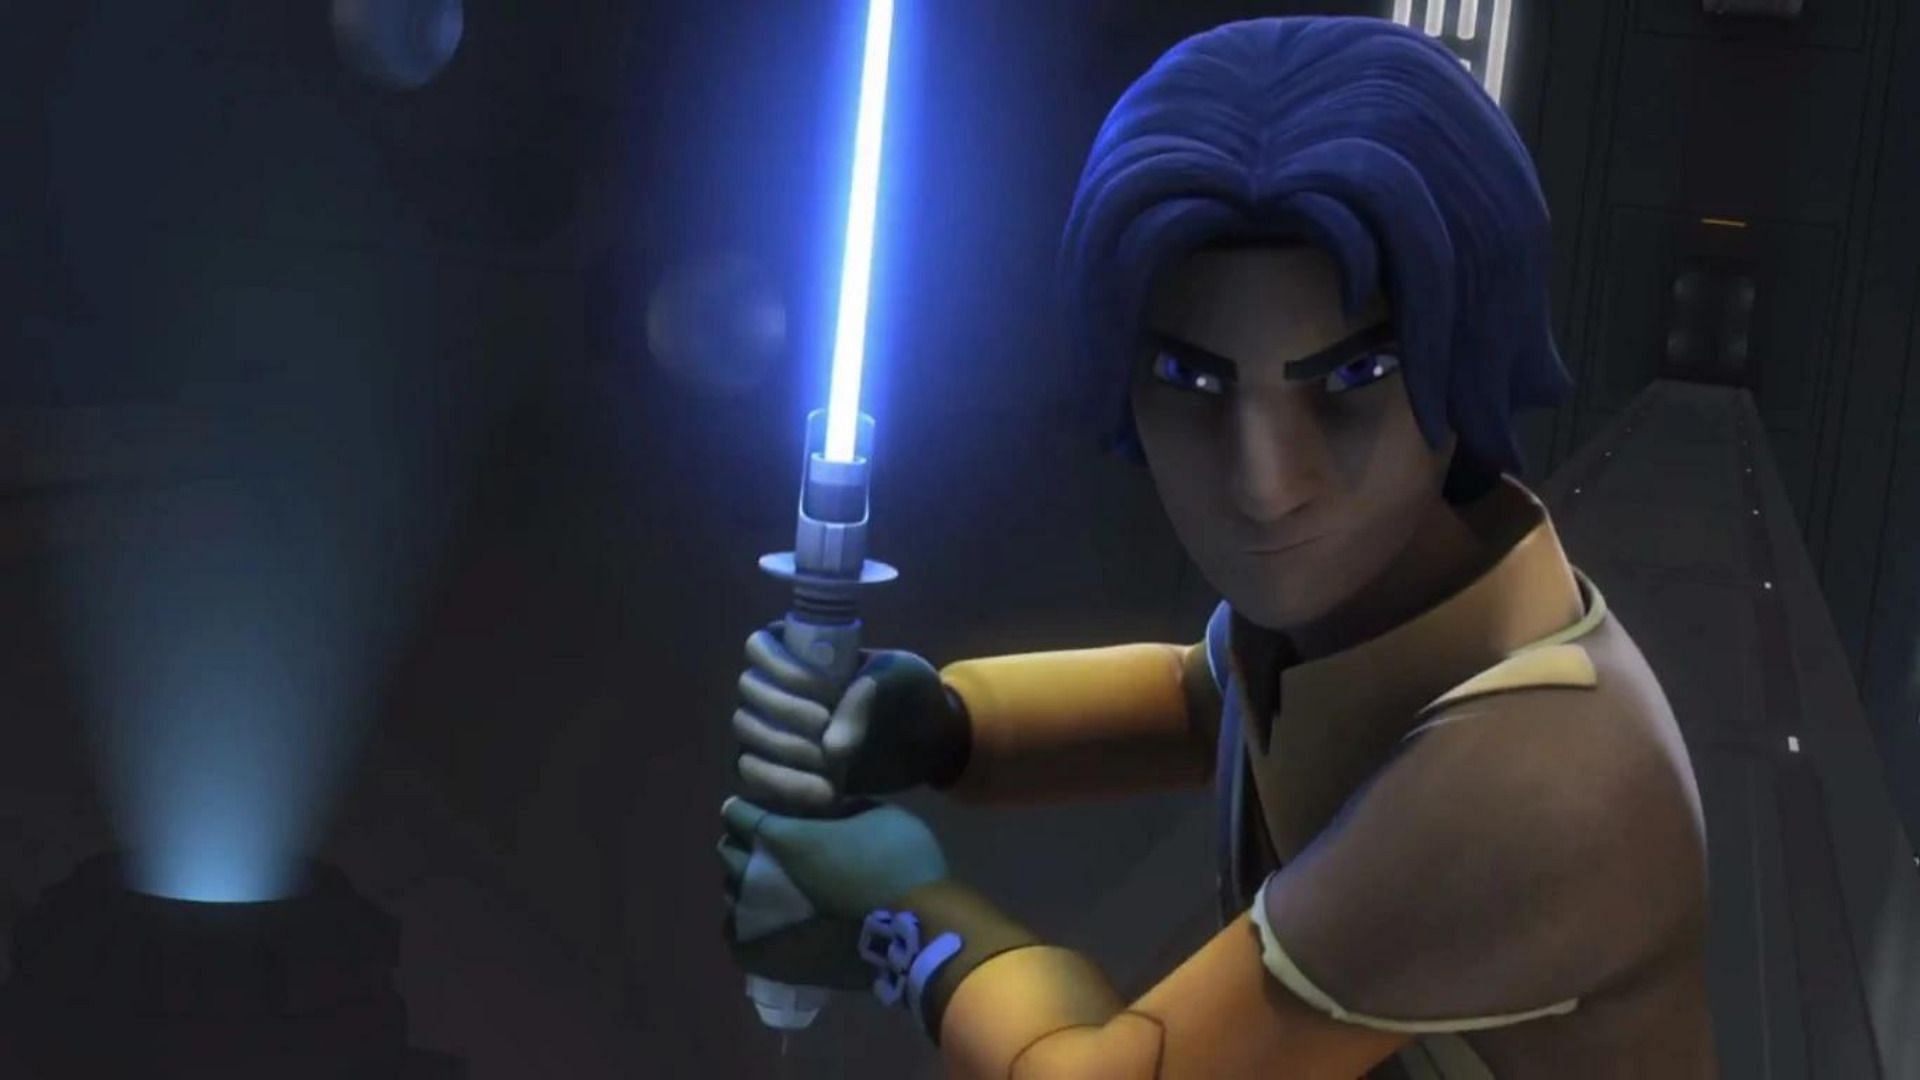 Exciting times ahead for Star Wars fans as Ezra Bridger's return promises a thrilling journey in Ahsoka (Image via Lucasfilm)